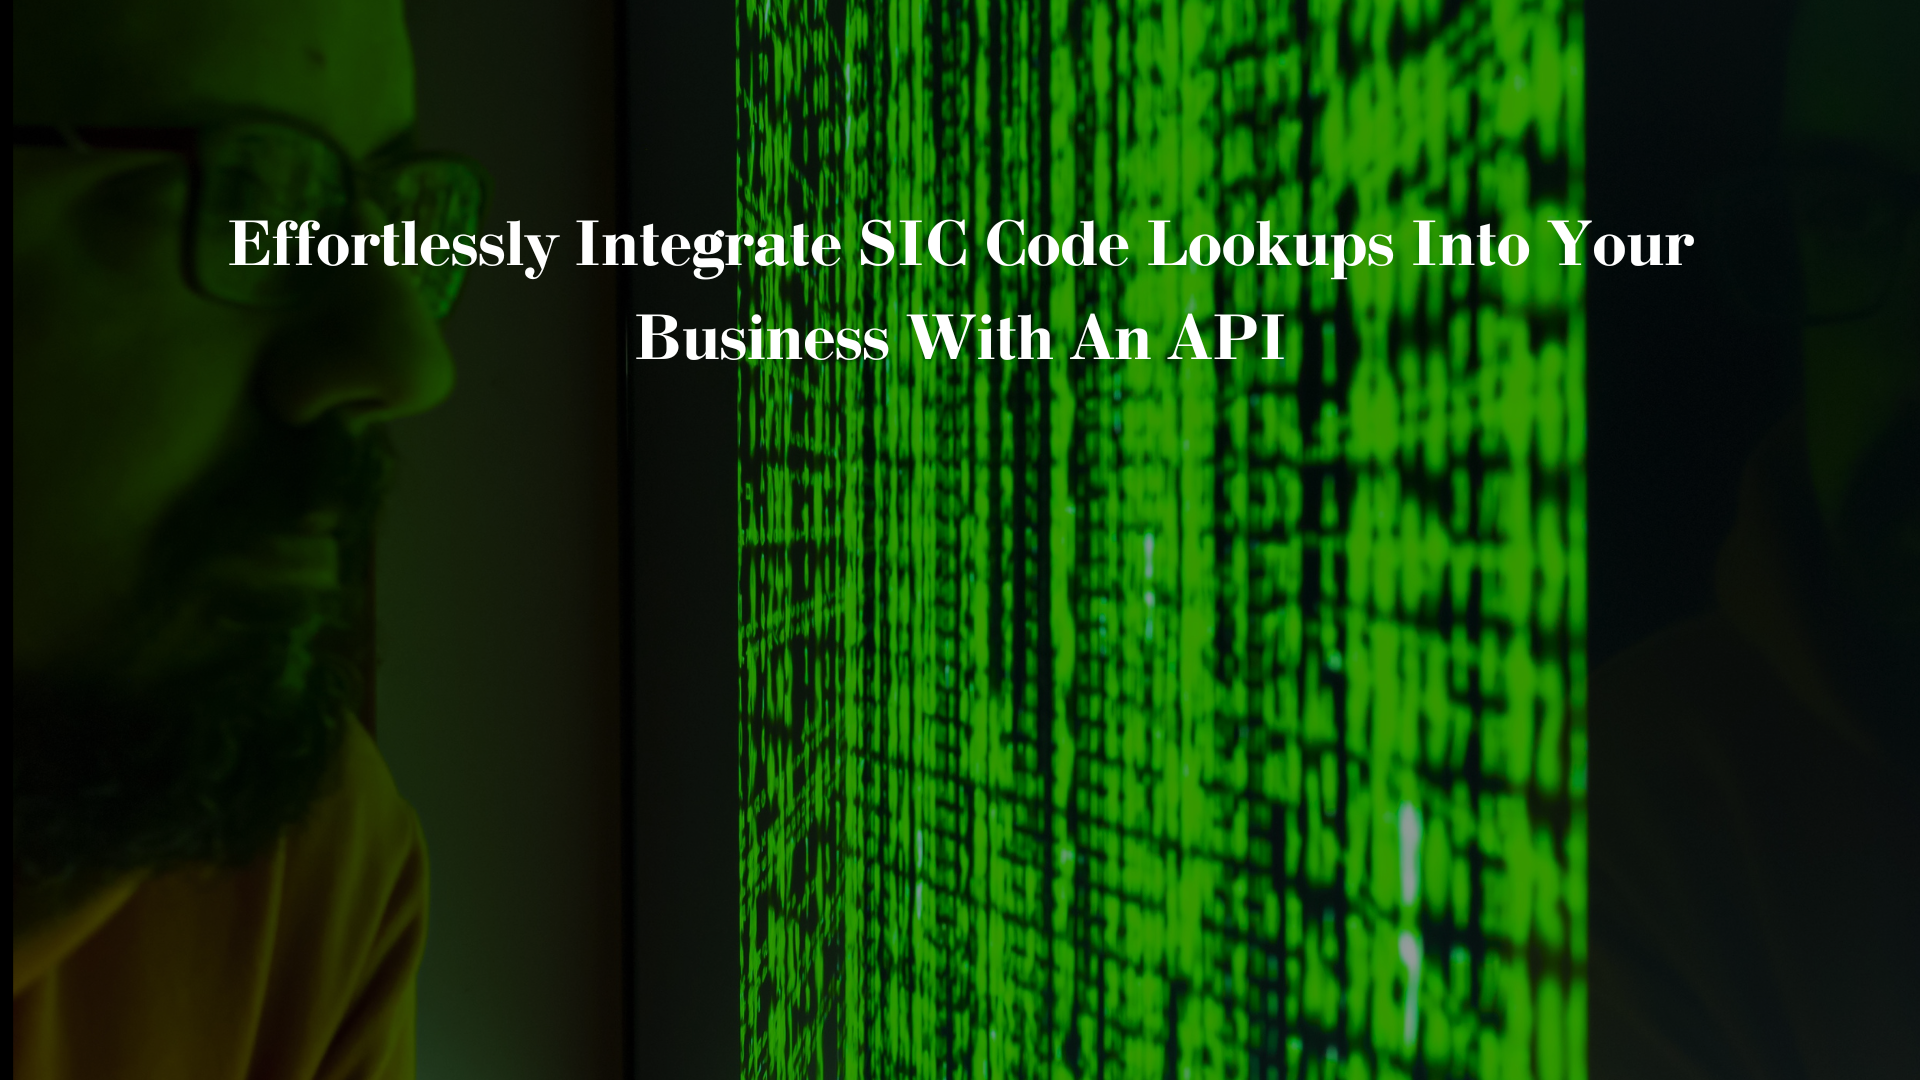 Effortlessly Integrate SIC Code Lookups Into Your Business With An API